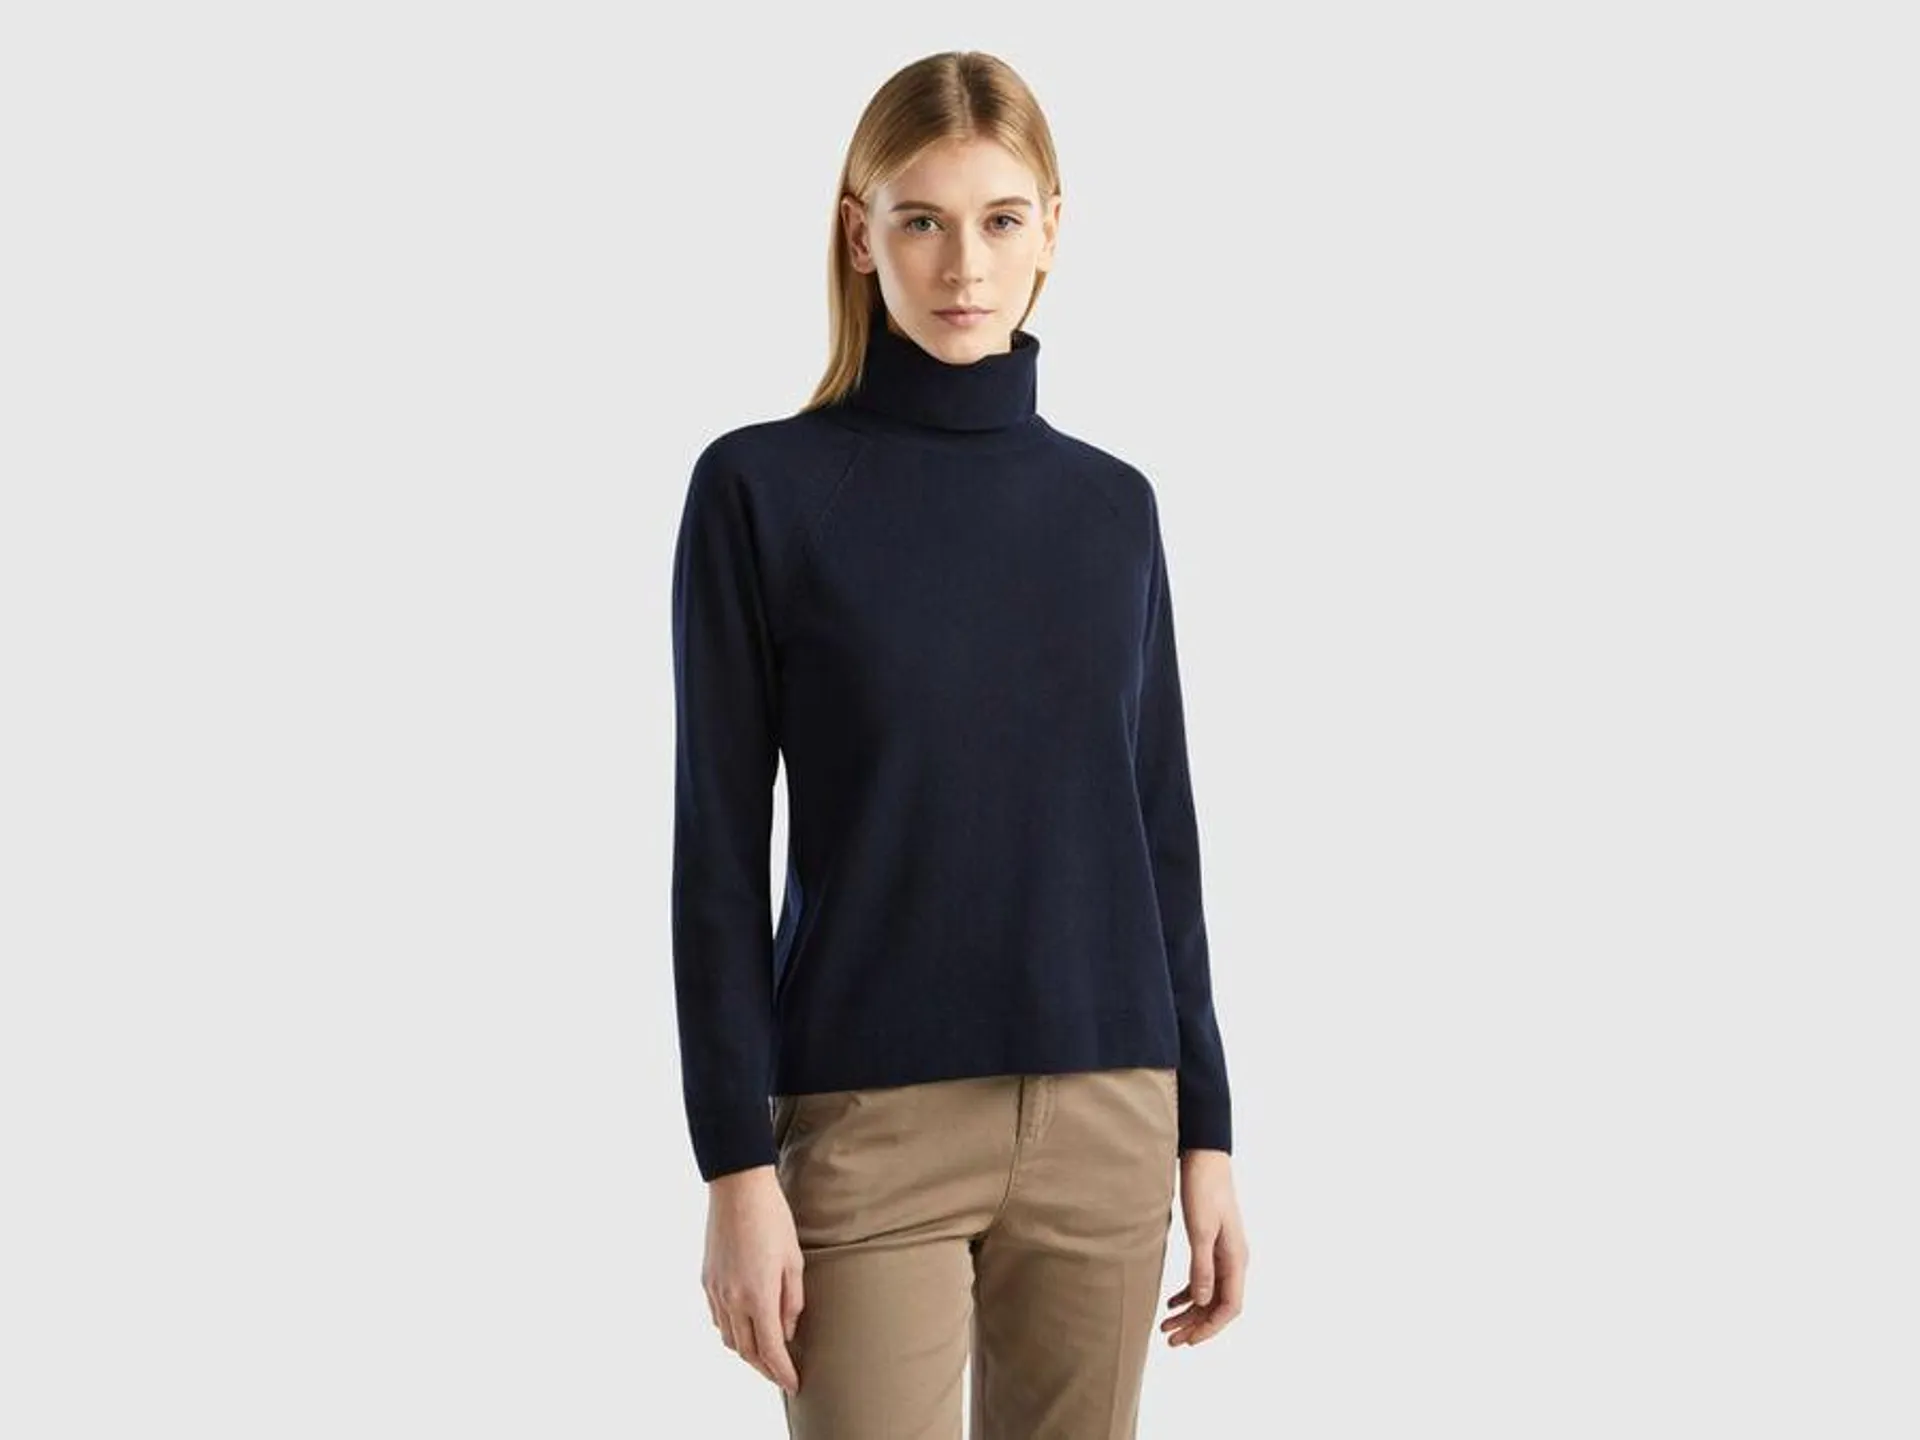 Dark blue turtleneck sweater in cashmere and wool blend